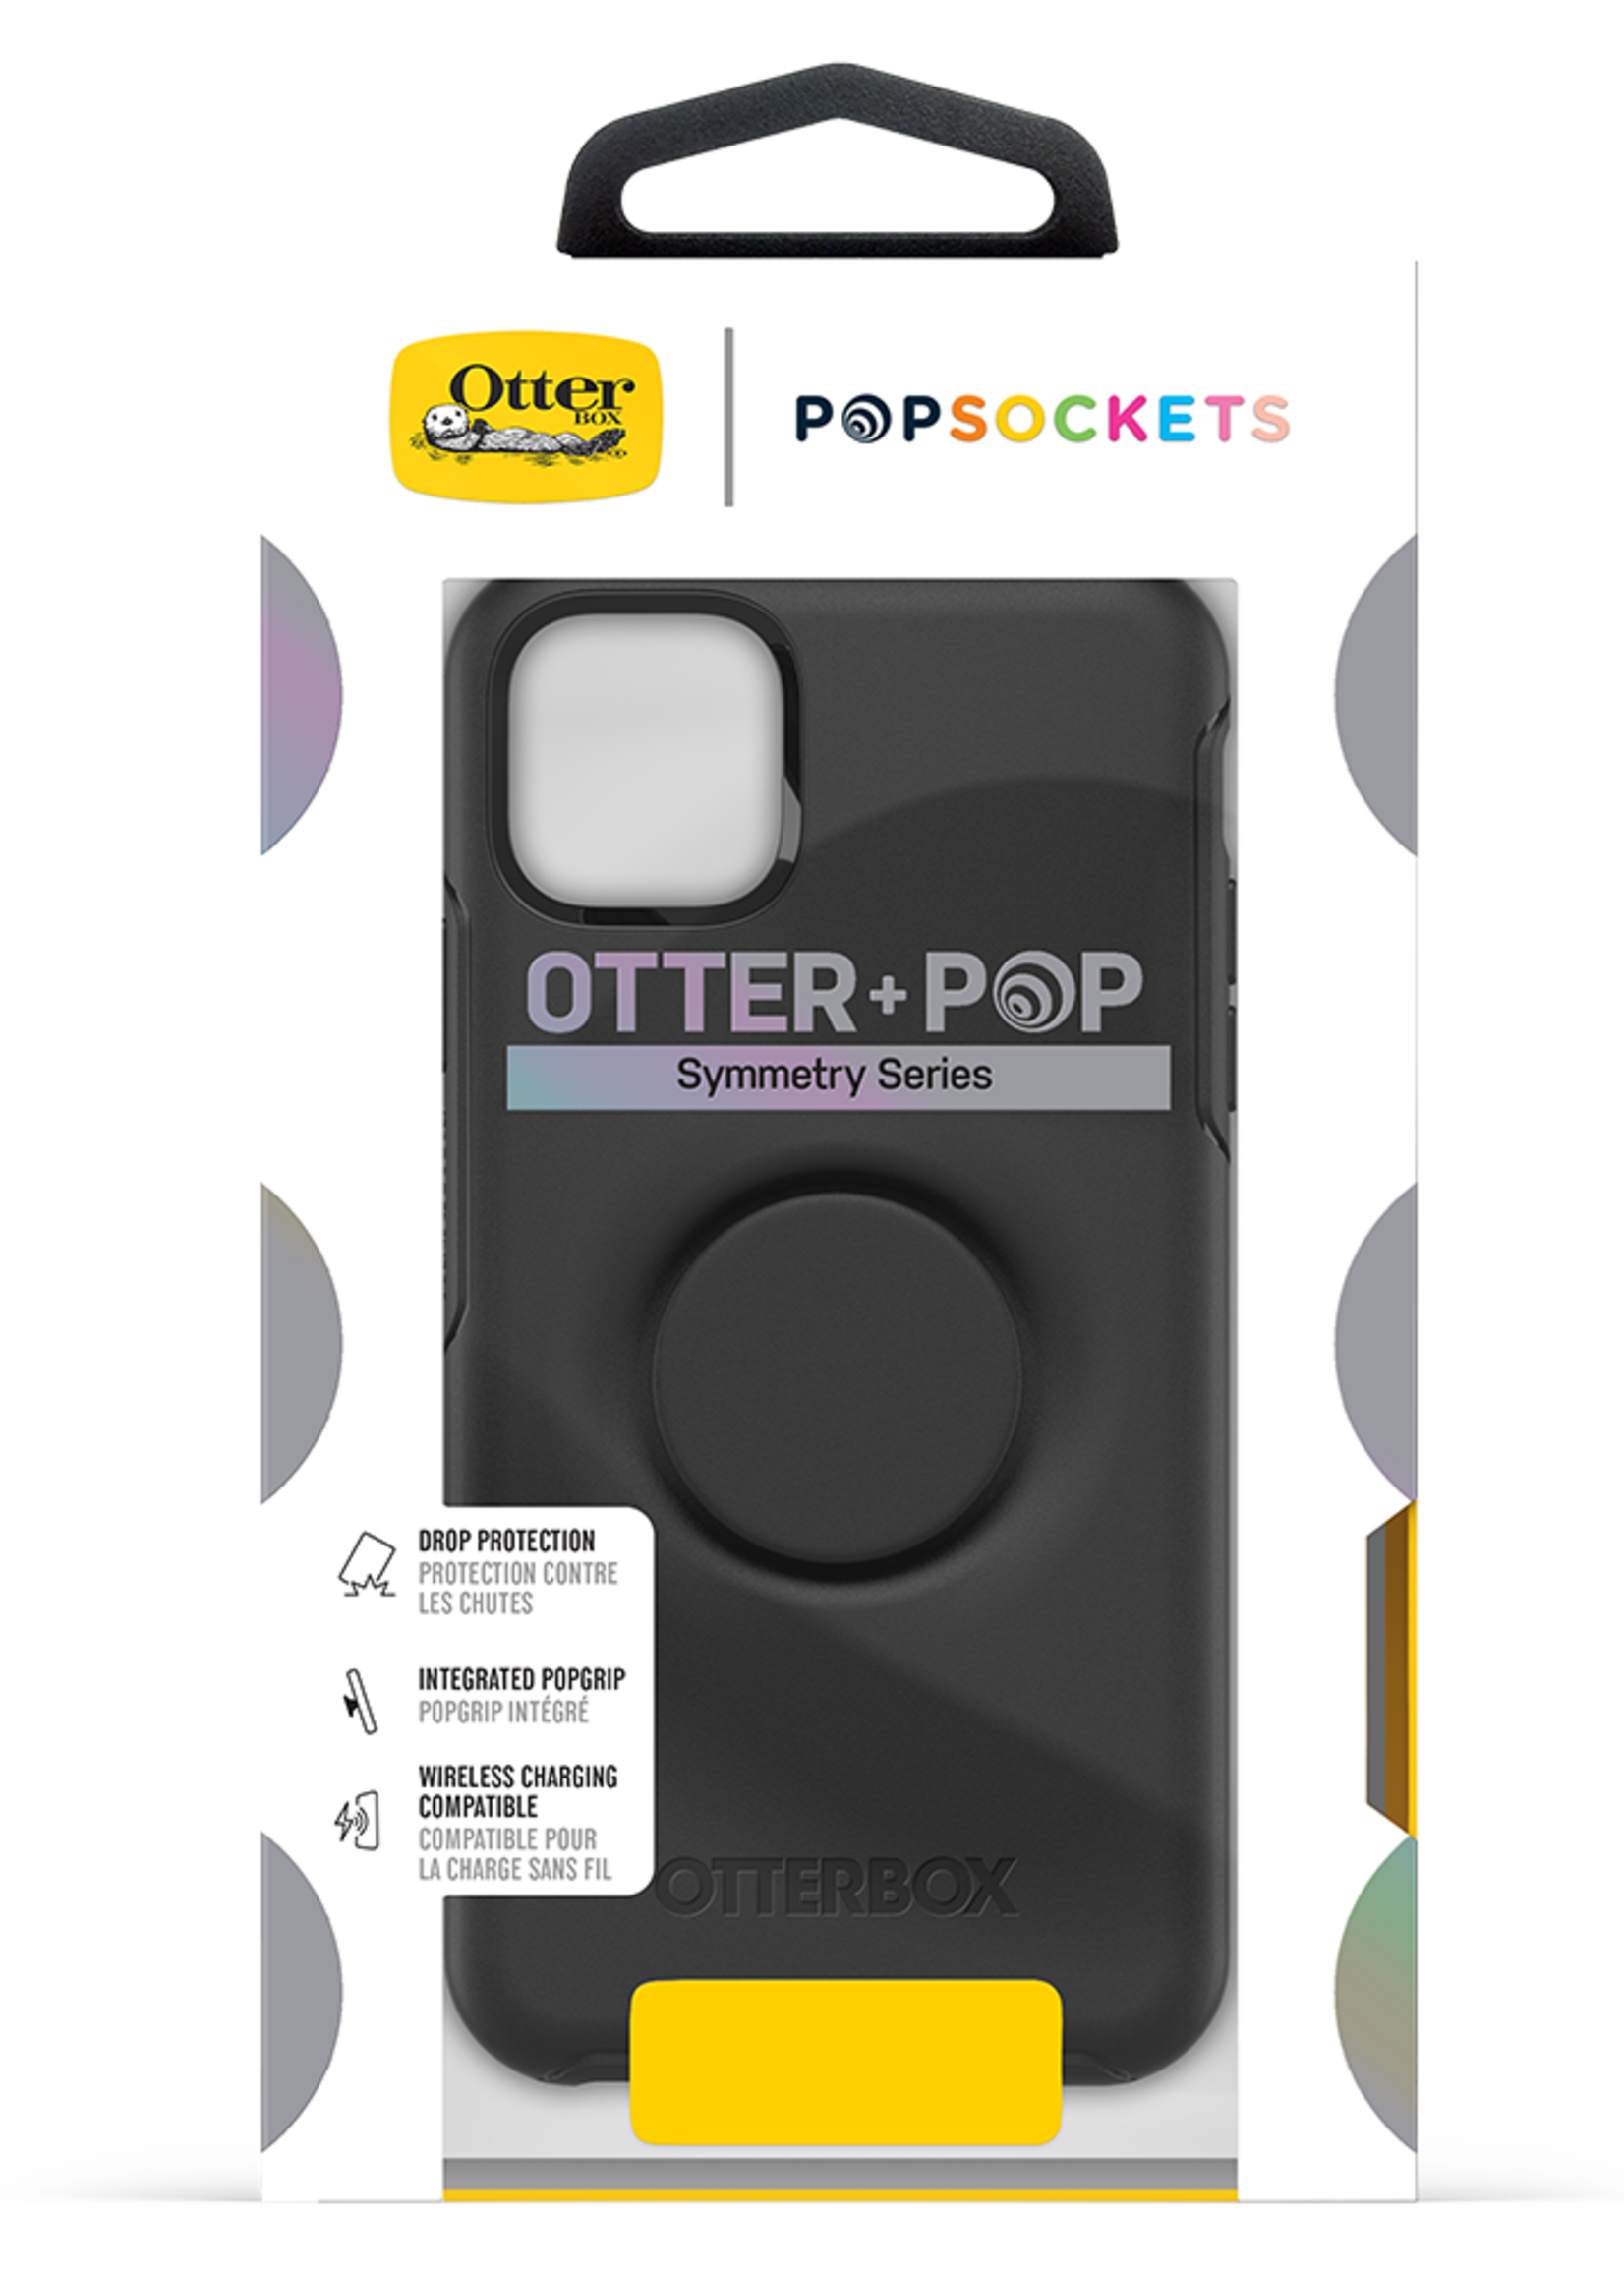 Otterbox OtterBox - Otter + Pop Symmetry Case with PopGrip for Apple iPhone 11 Pro Max - Black